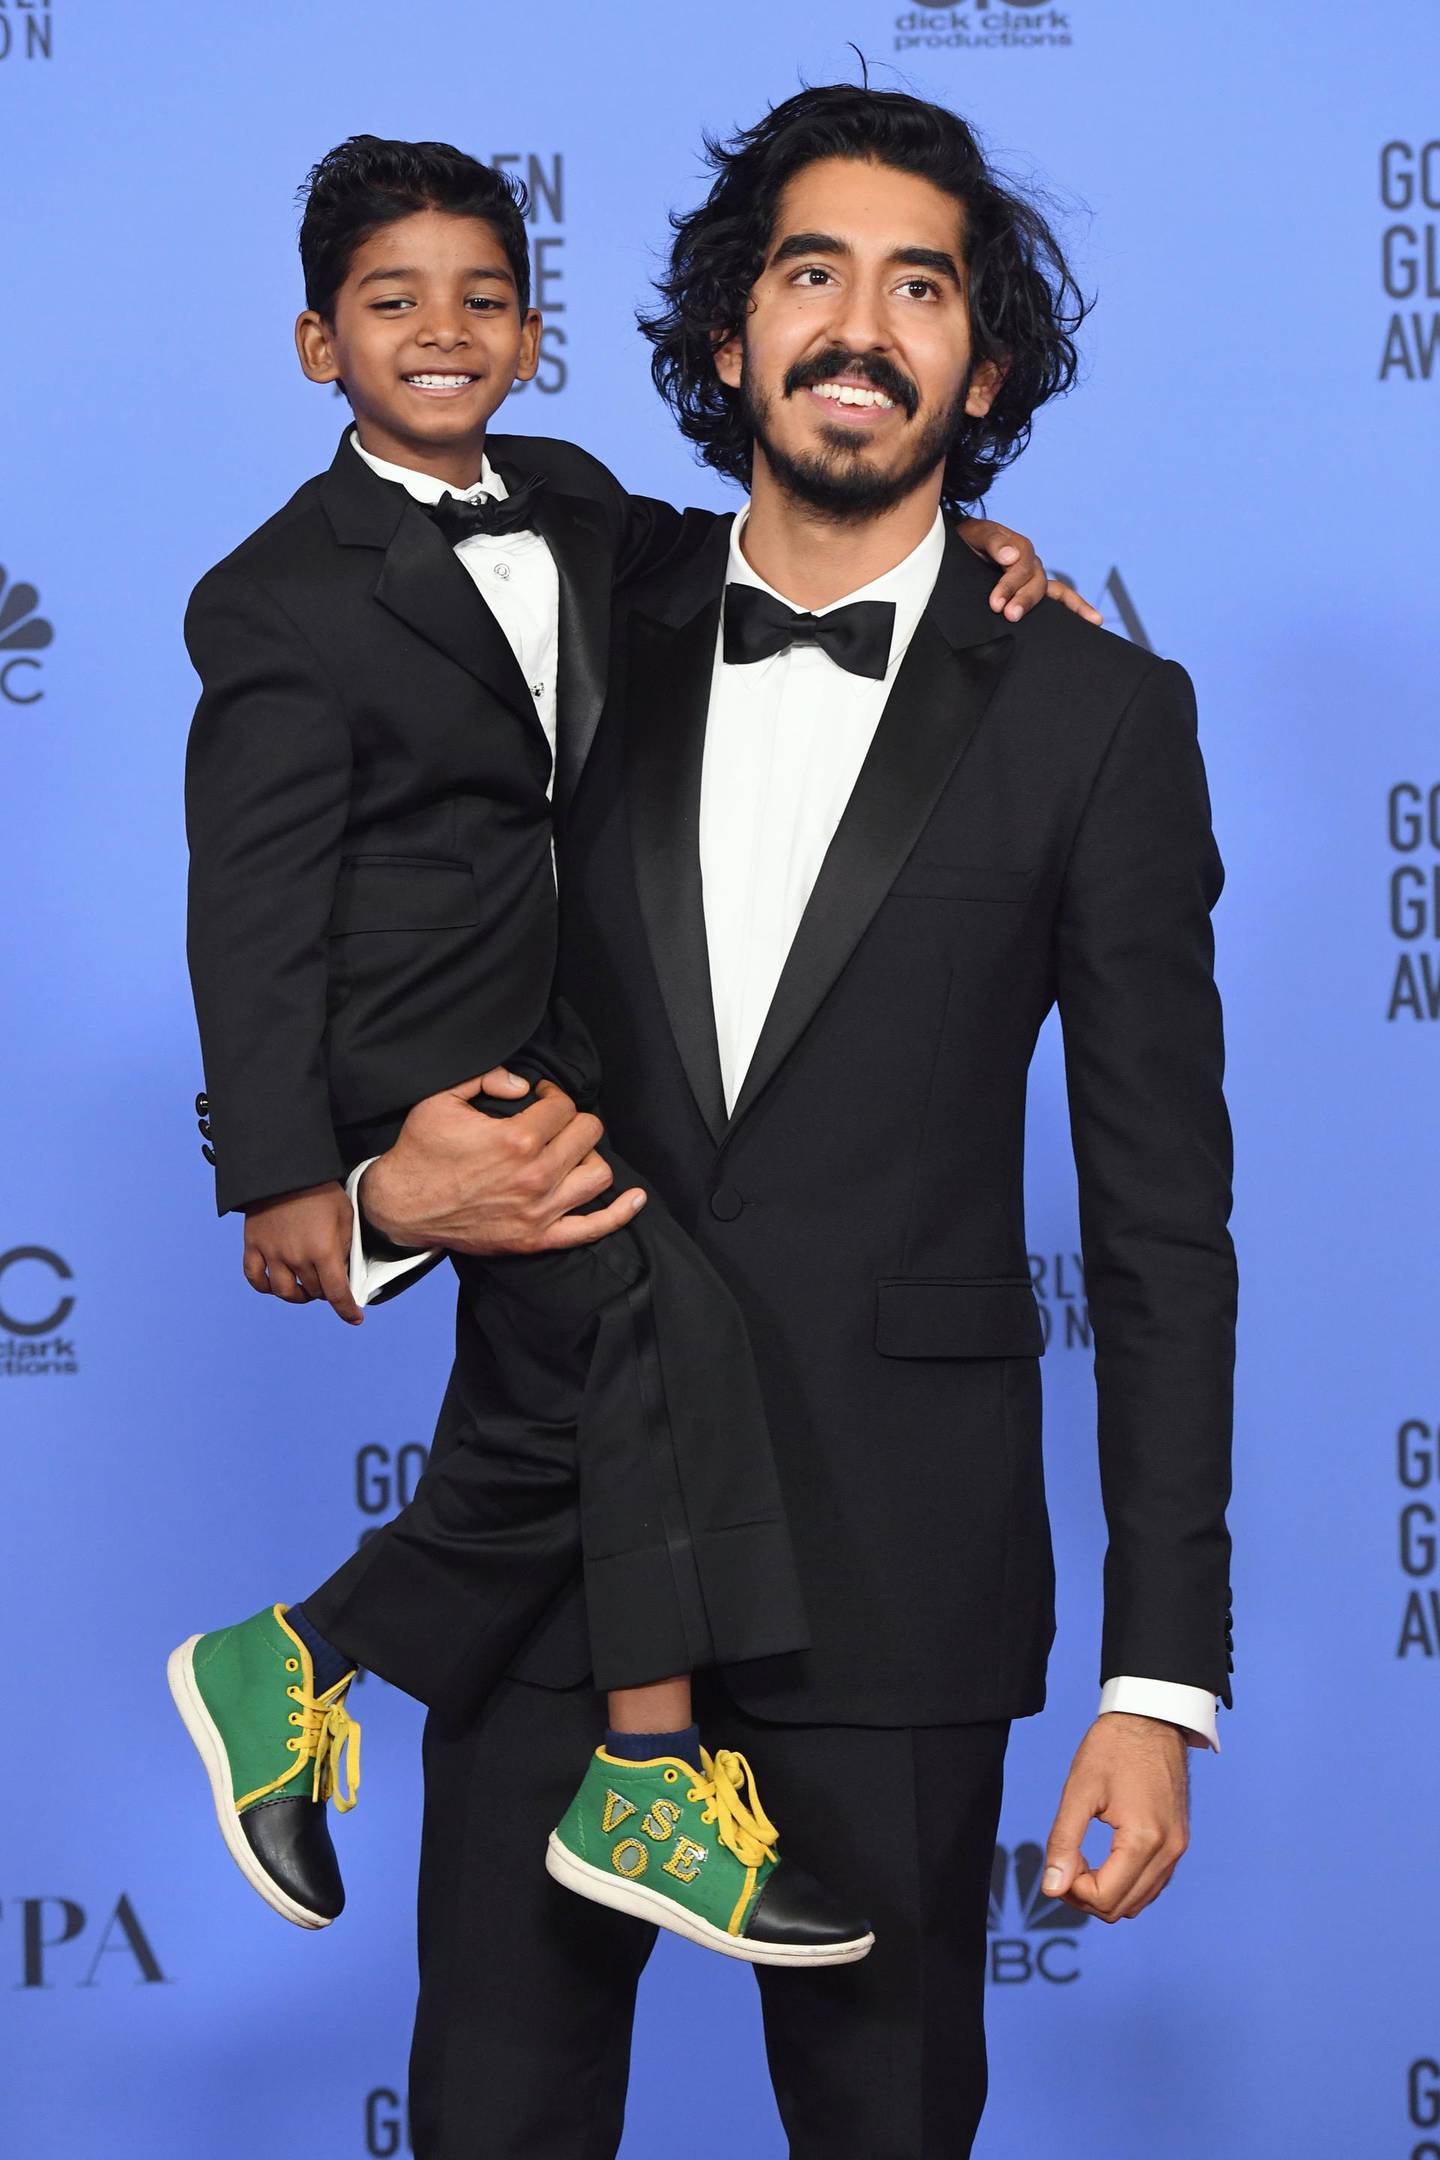 BEVERLY HILLS, CA - JANUARY 08: Actors Sunny Pawar (L) and Dev Patel pose in the press room during the 74th Annual Golden Globe Awards at The Beverly Hilton Hotel on January 8, 2017 in Beverly Hills, California.   Kevin Winter/Getty Images/AFP